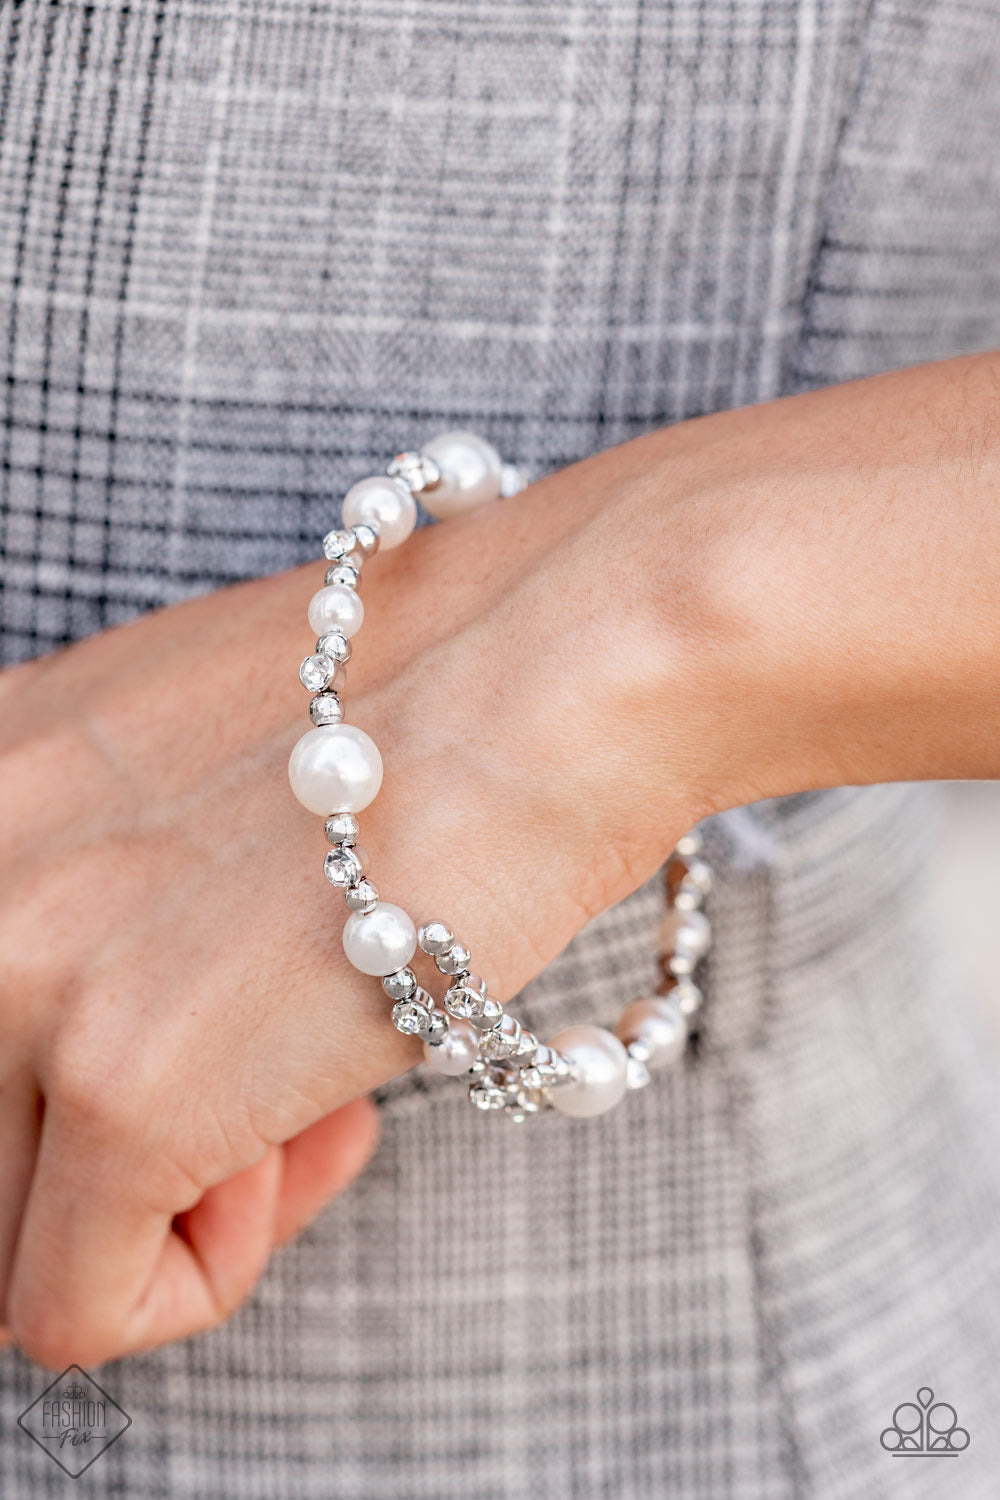 Chicly Celebrity - White Pearl - Rhinestone Infinity Wrap Bracelet - Paparazzi Accessories - Bubbly pearls and brilliant white rhinestones are accented with shiny silver beads threaded along a single wire to create a chicly glamorous infinity wrap bracelet.